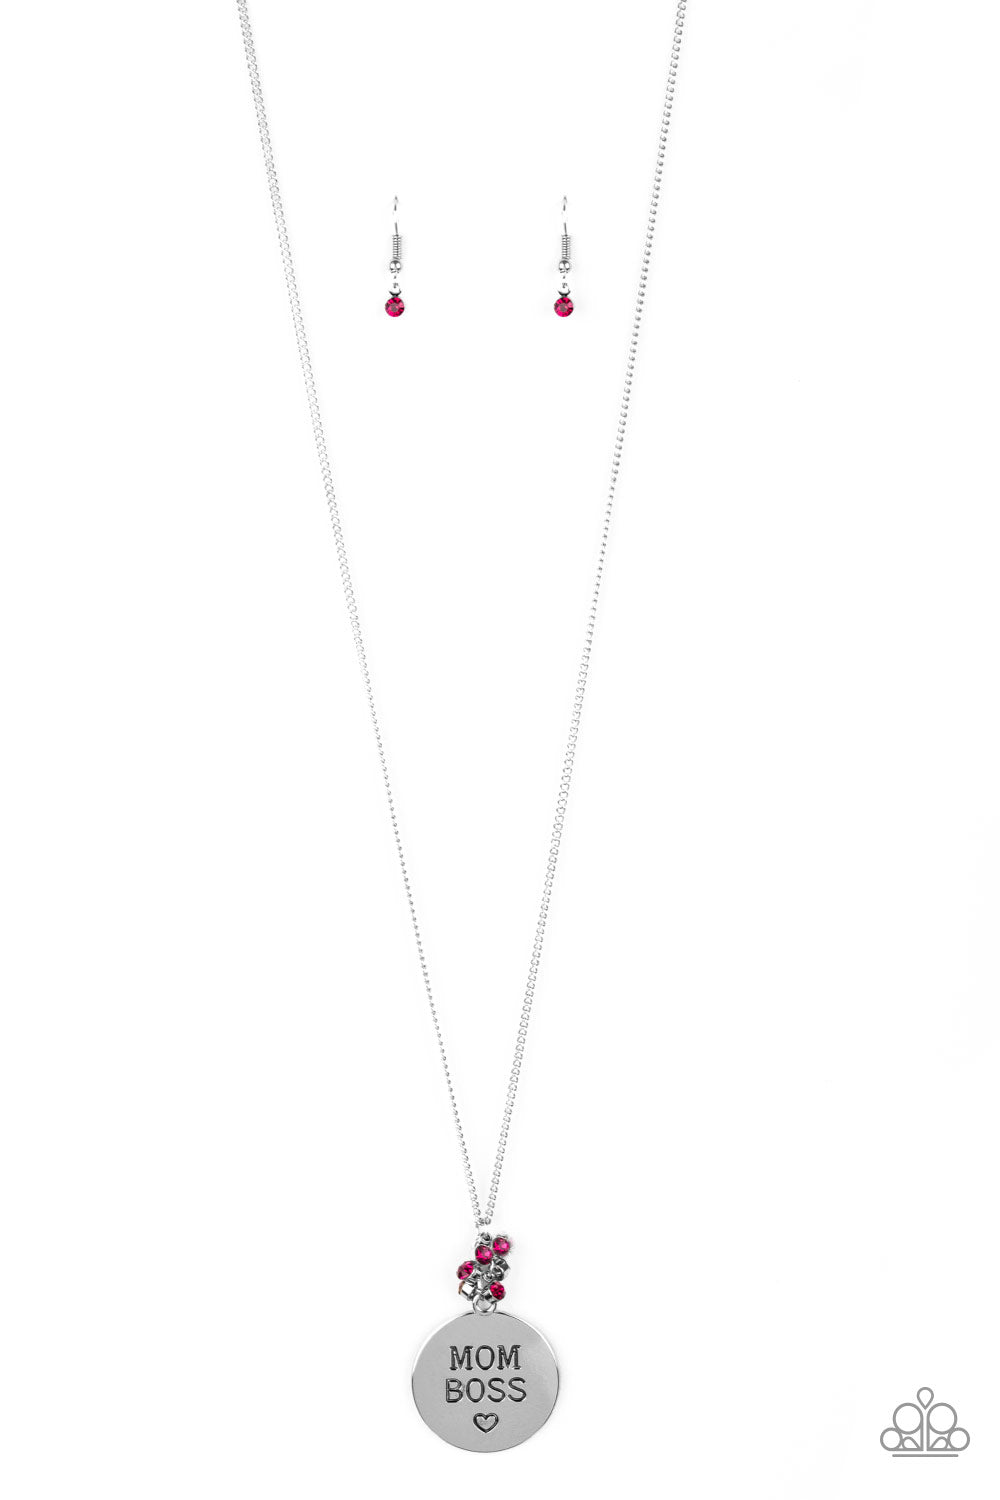 Paparazzi Mom Boss Pink Long Necklace